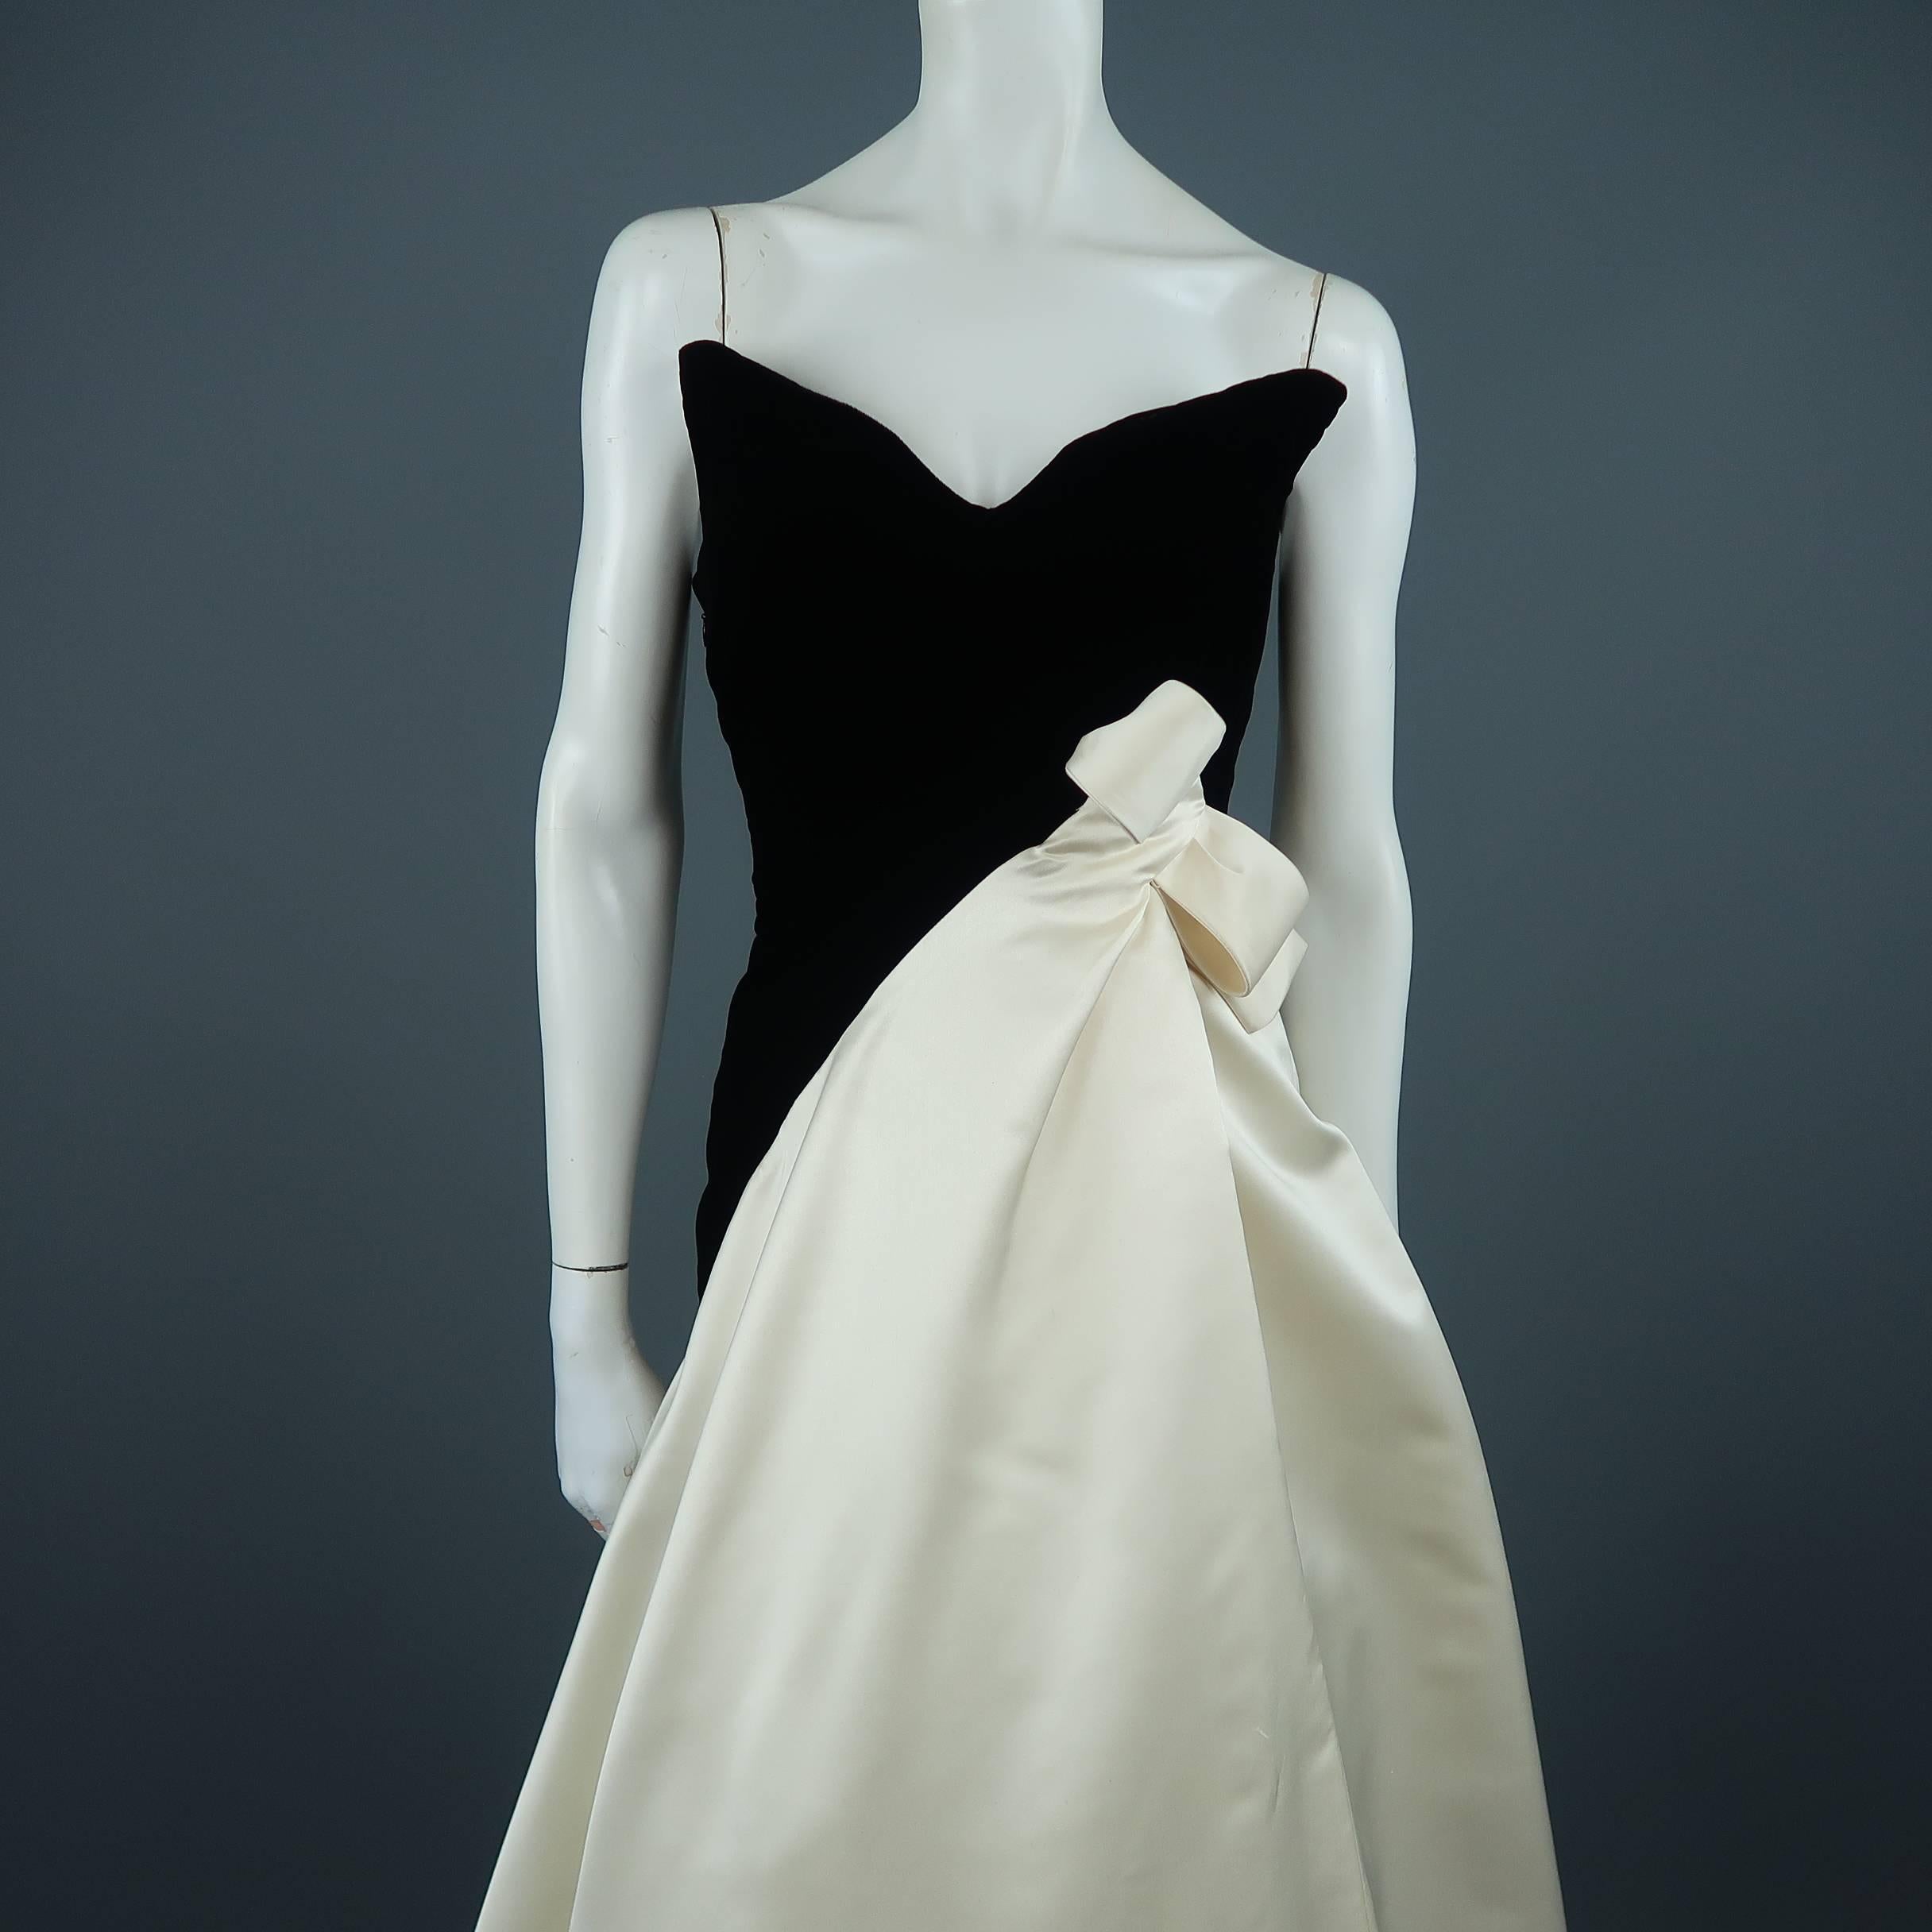 Vintage BOUTIQUE by SCAASI for I.MAGNIN gown by legendary fashion designer Arnold Scaasi features a black velvet bustier bodice with pointed sweetheart neckline and asymmetrical cream silk satin skirt with bow detail at waist and full tulle